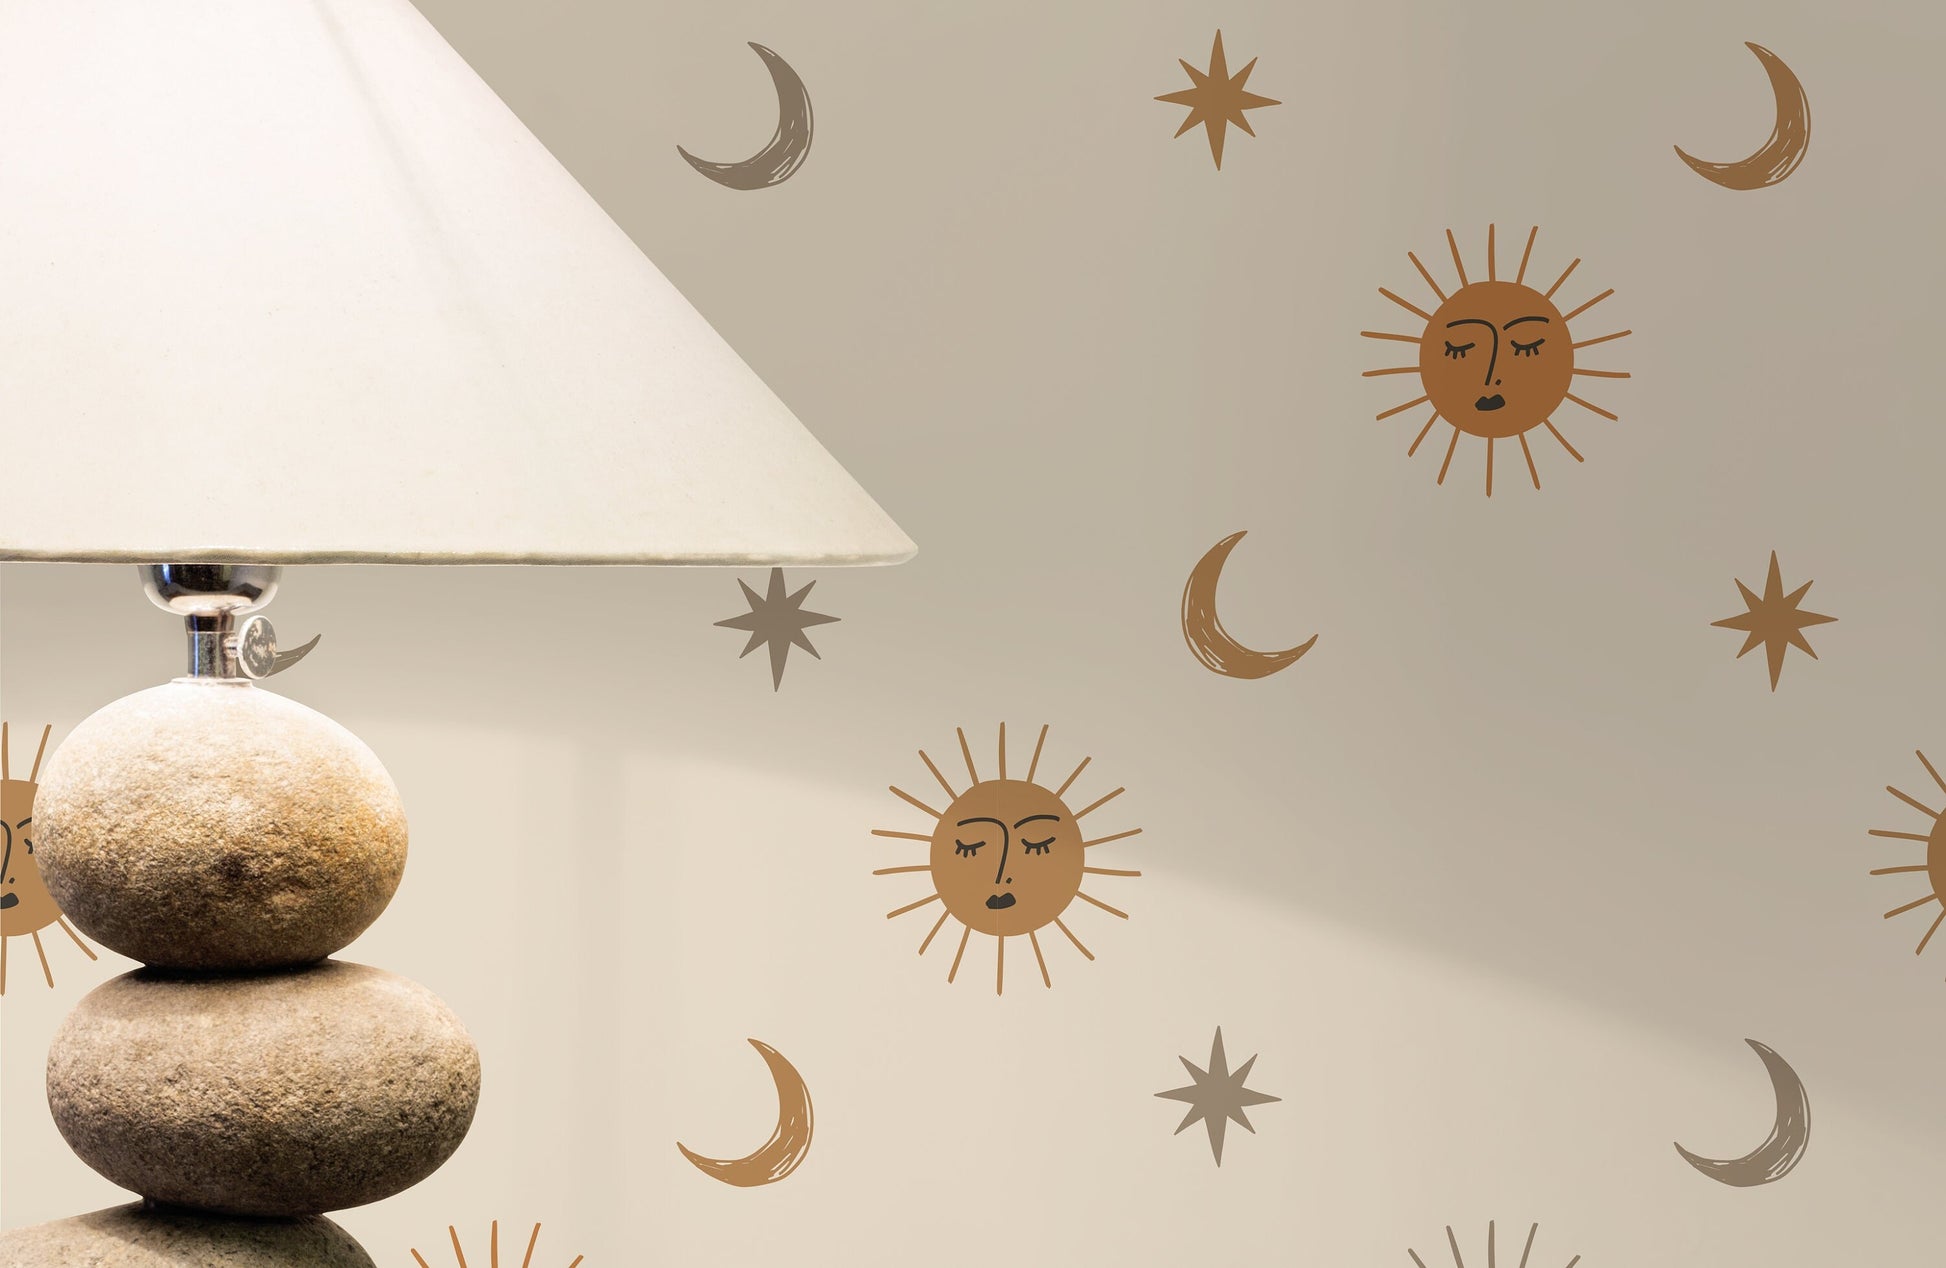 Sun and Moon Wallpaper Removable Peel and Stick Wallpaper, Mystic Boho Constellation Peel and Stick Wallpaper - ZACA